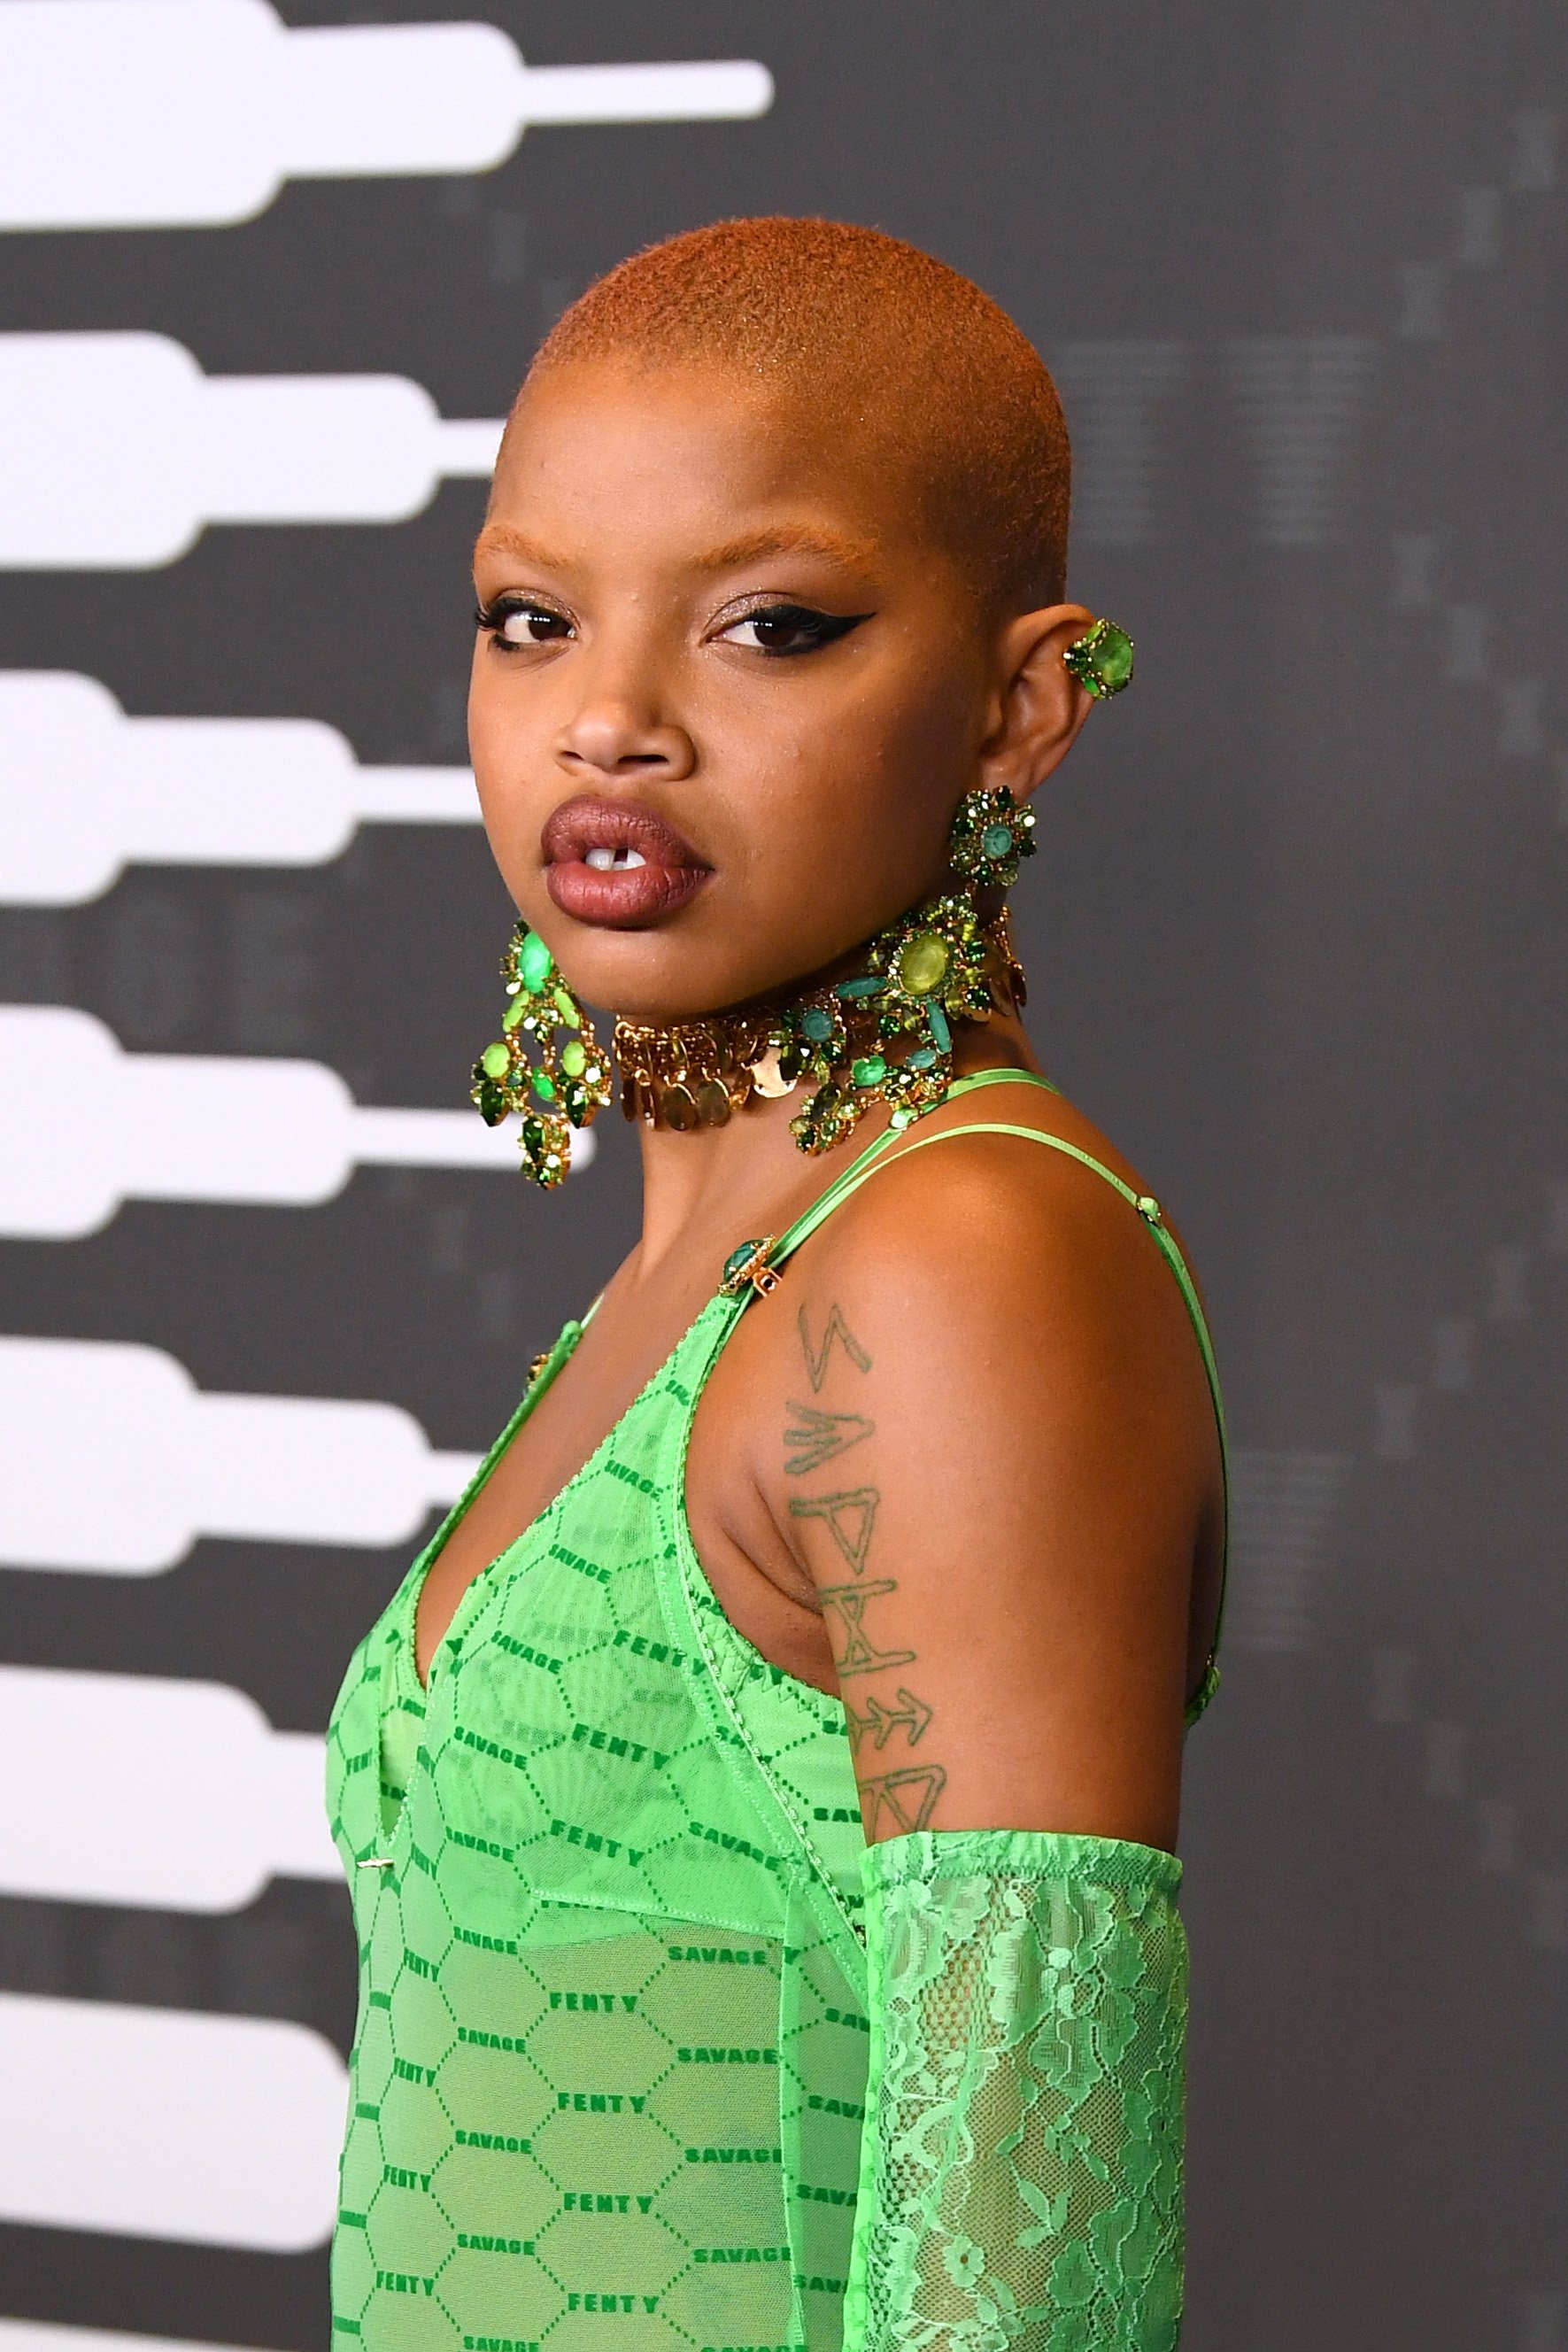  Slick Woods attends Savage X Fenty Show Presented By Amazon Prime Video - Arrivals at Barclays Center on September 10, 2019| Photo: Getty Images